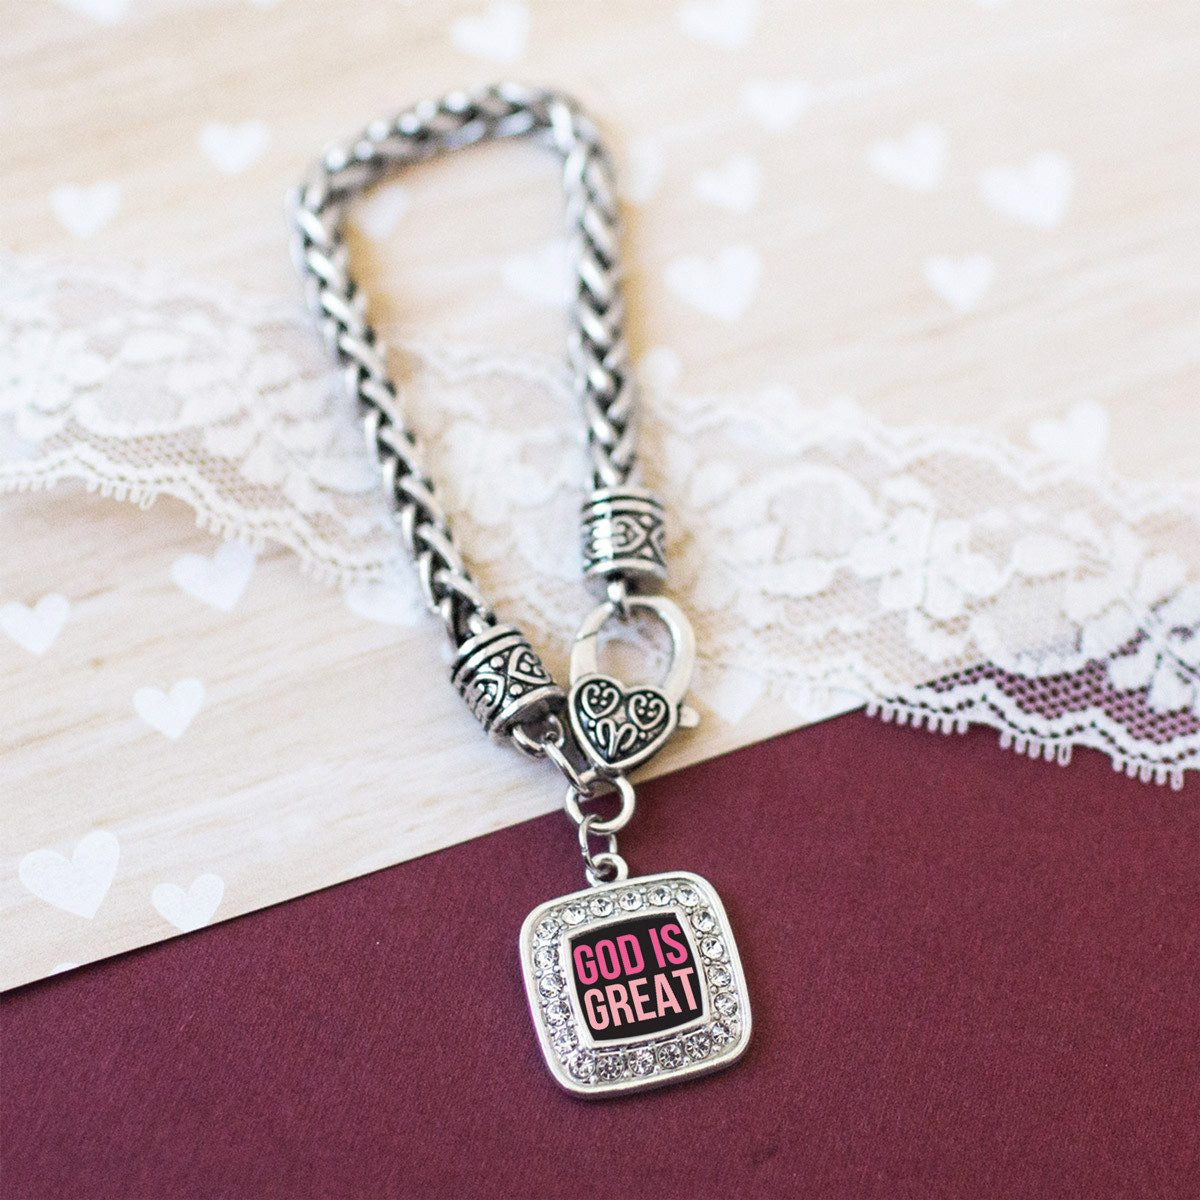 God is Great Charm Jewelry Collection